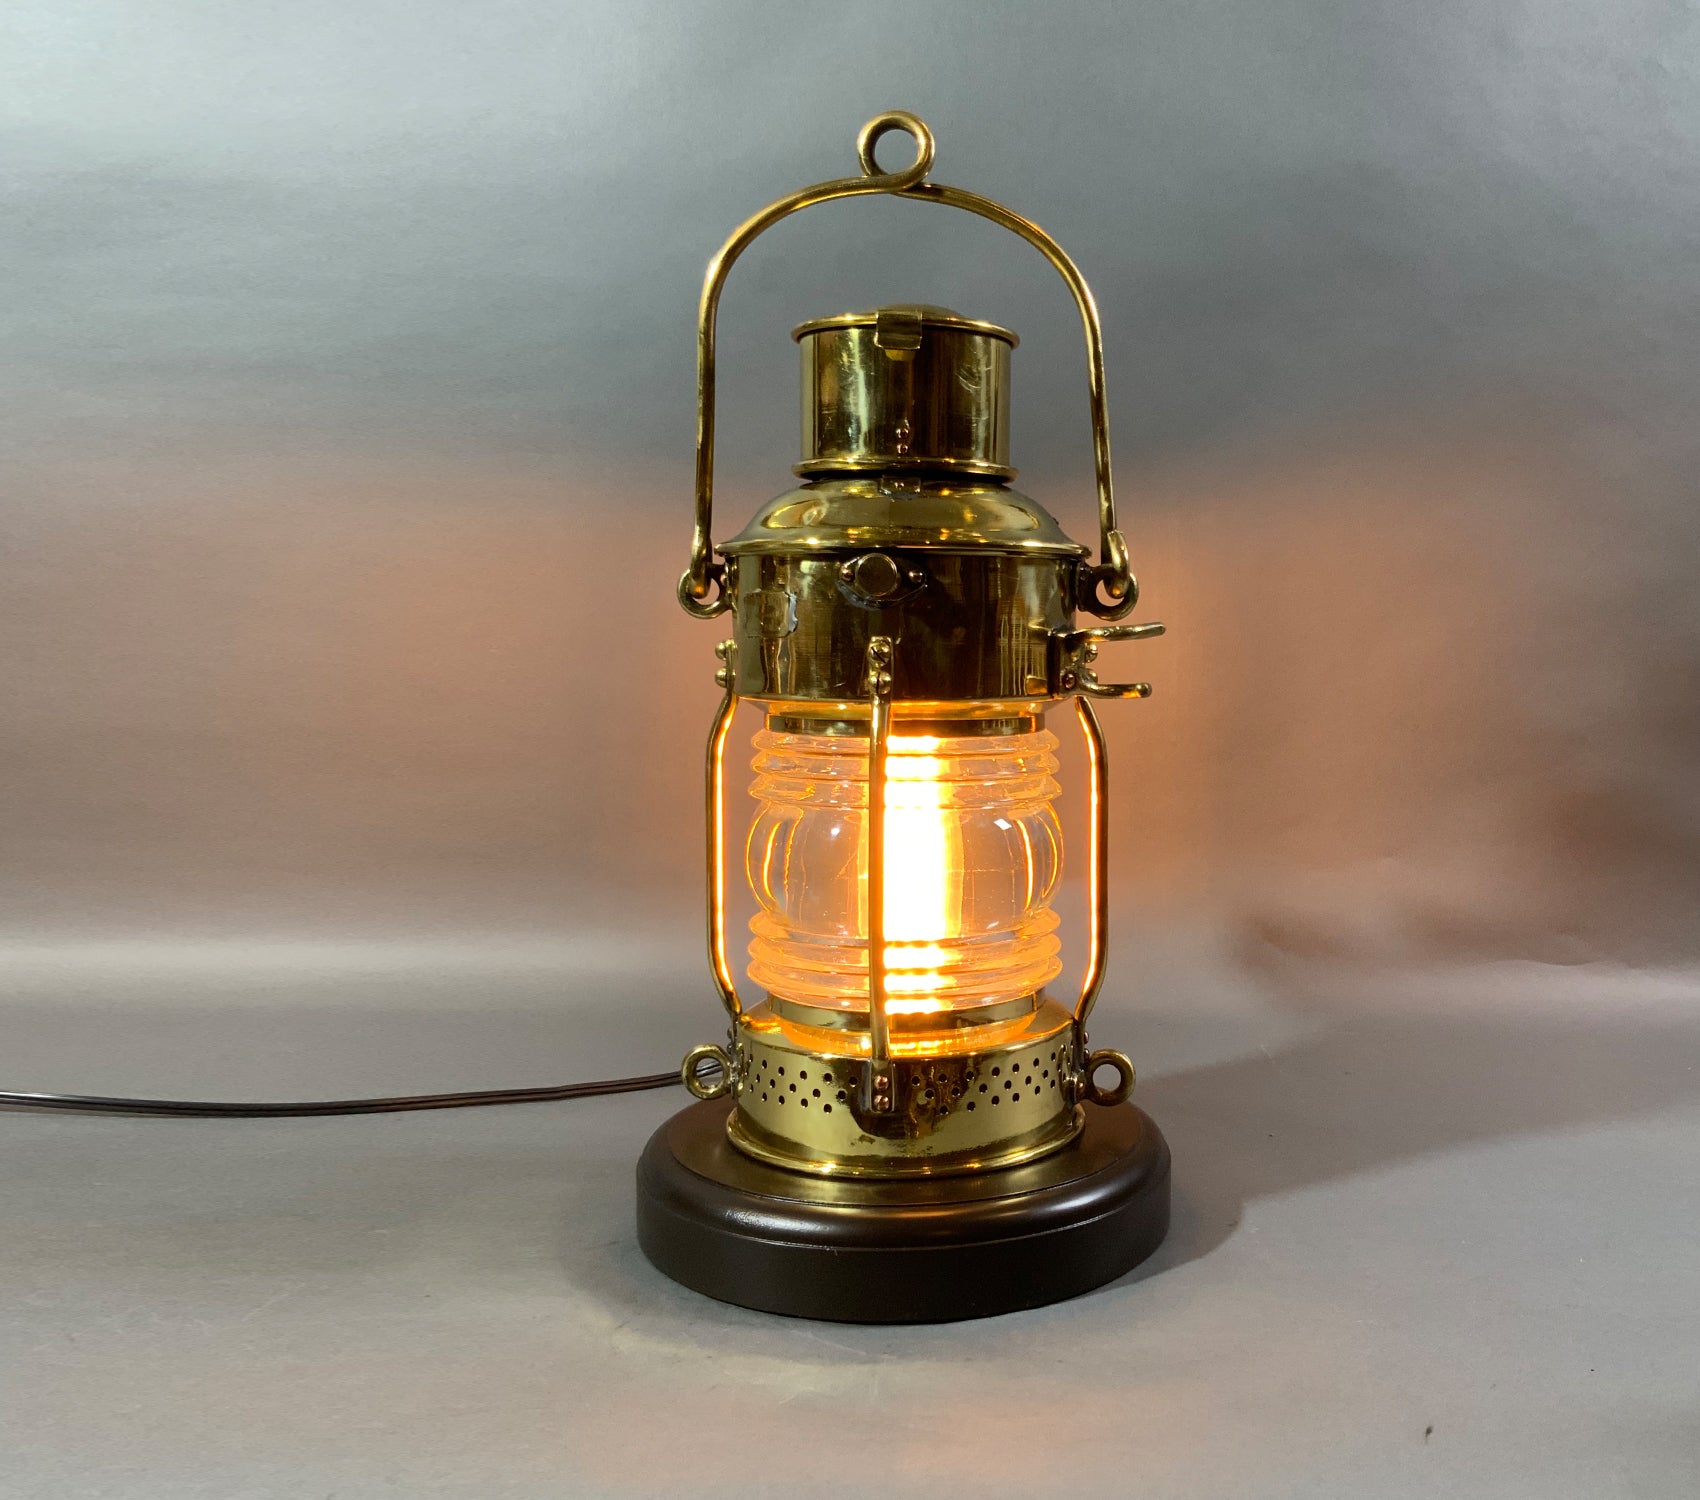 Antique Ships Anchor Lantern by French Maker – Lannan Gallery